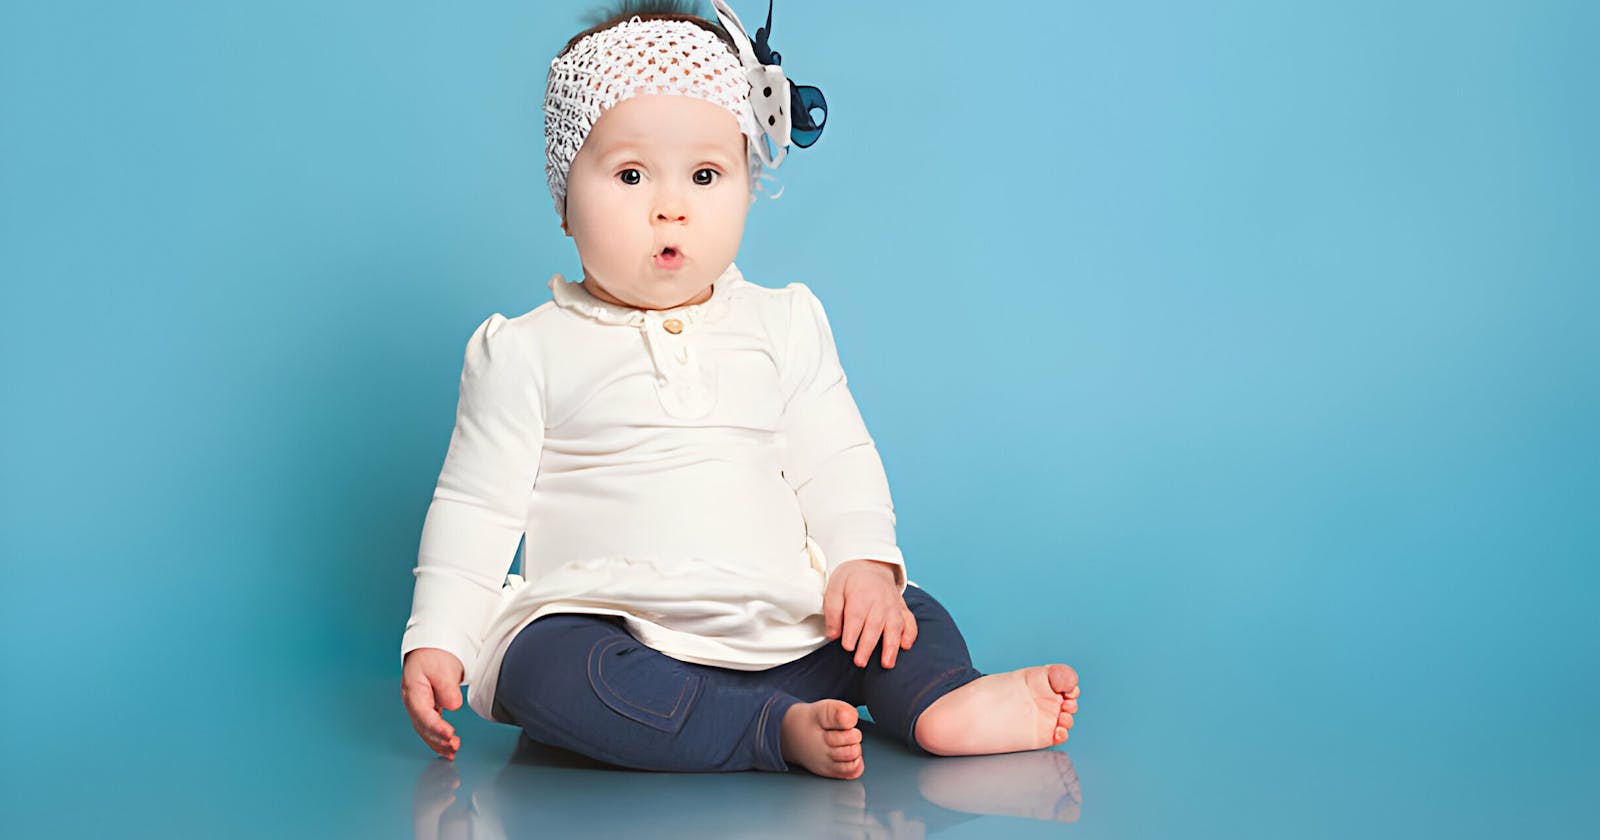 Dress Code: Baby Fashion Trends for the Little Fashionista